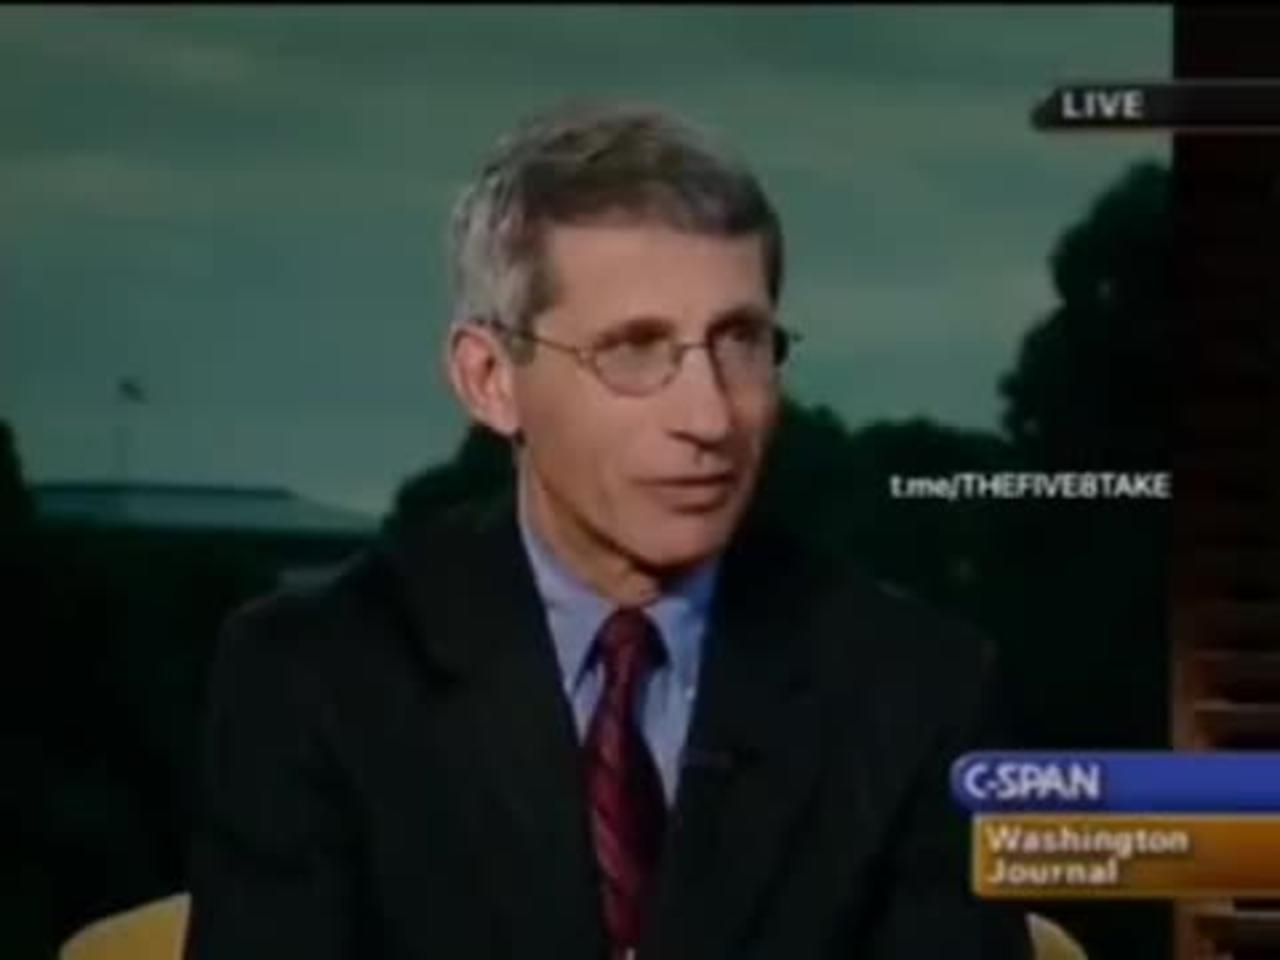 Fauci confirms the science